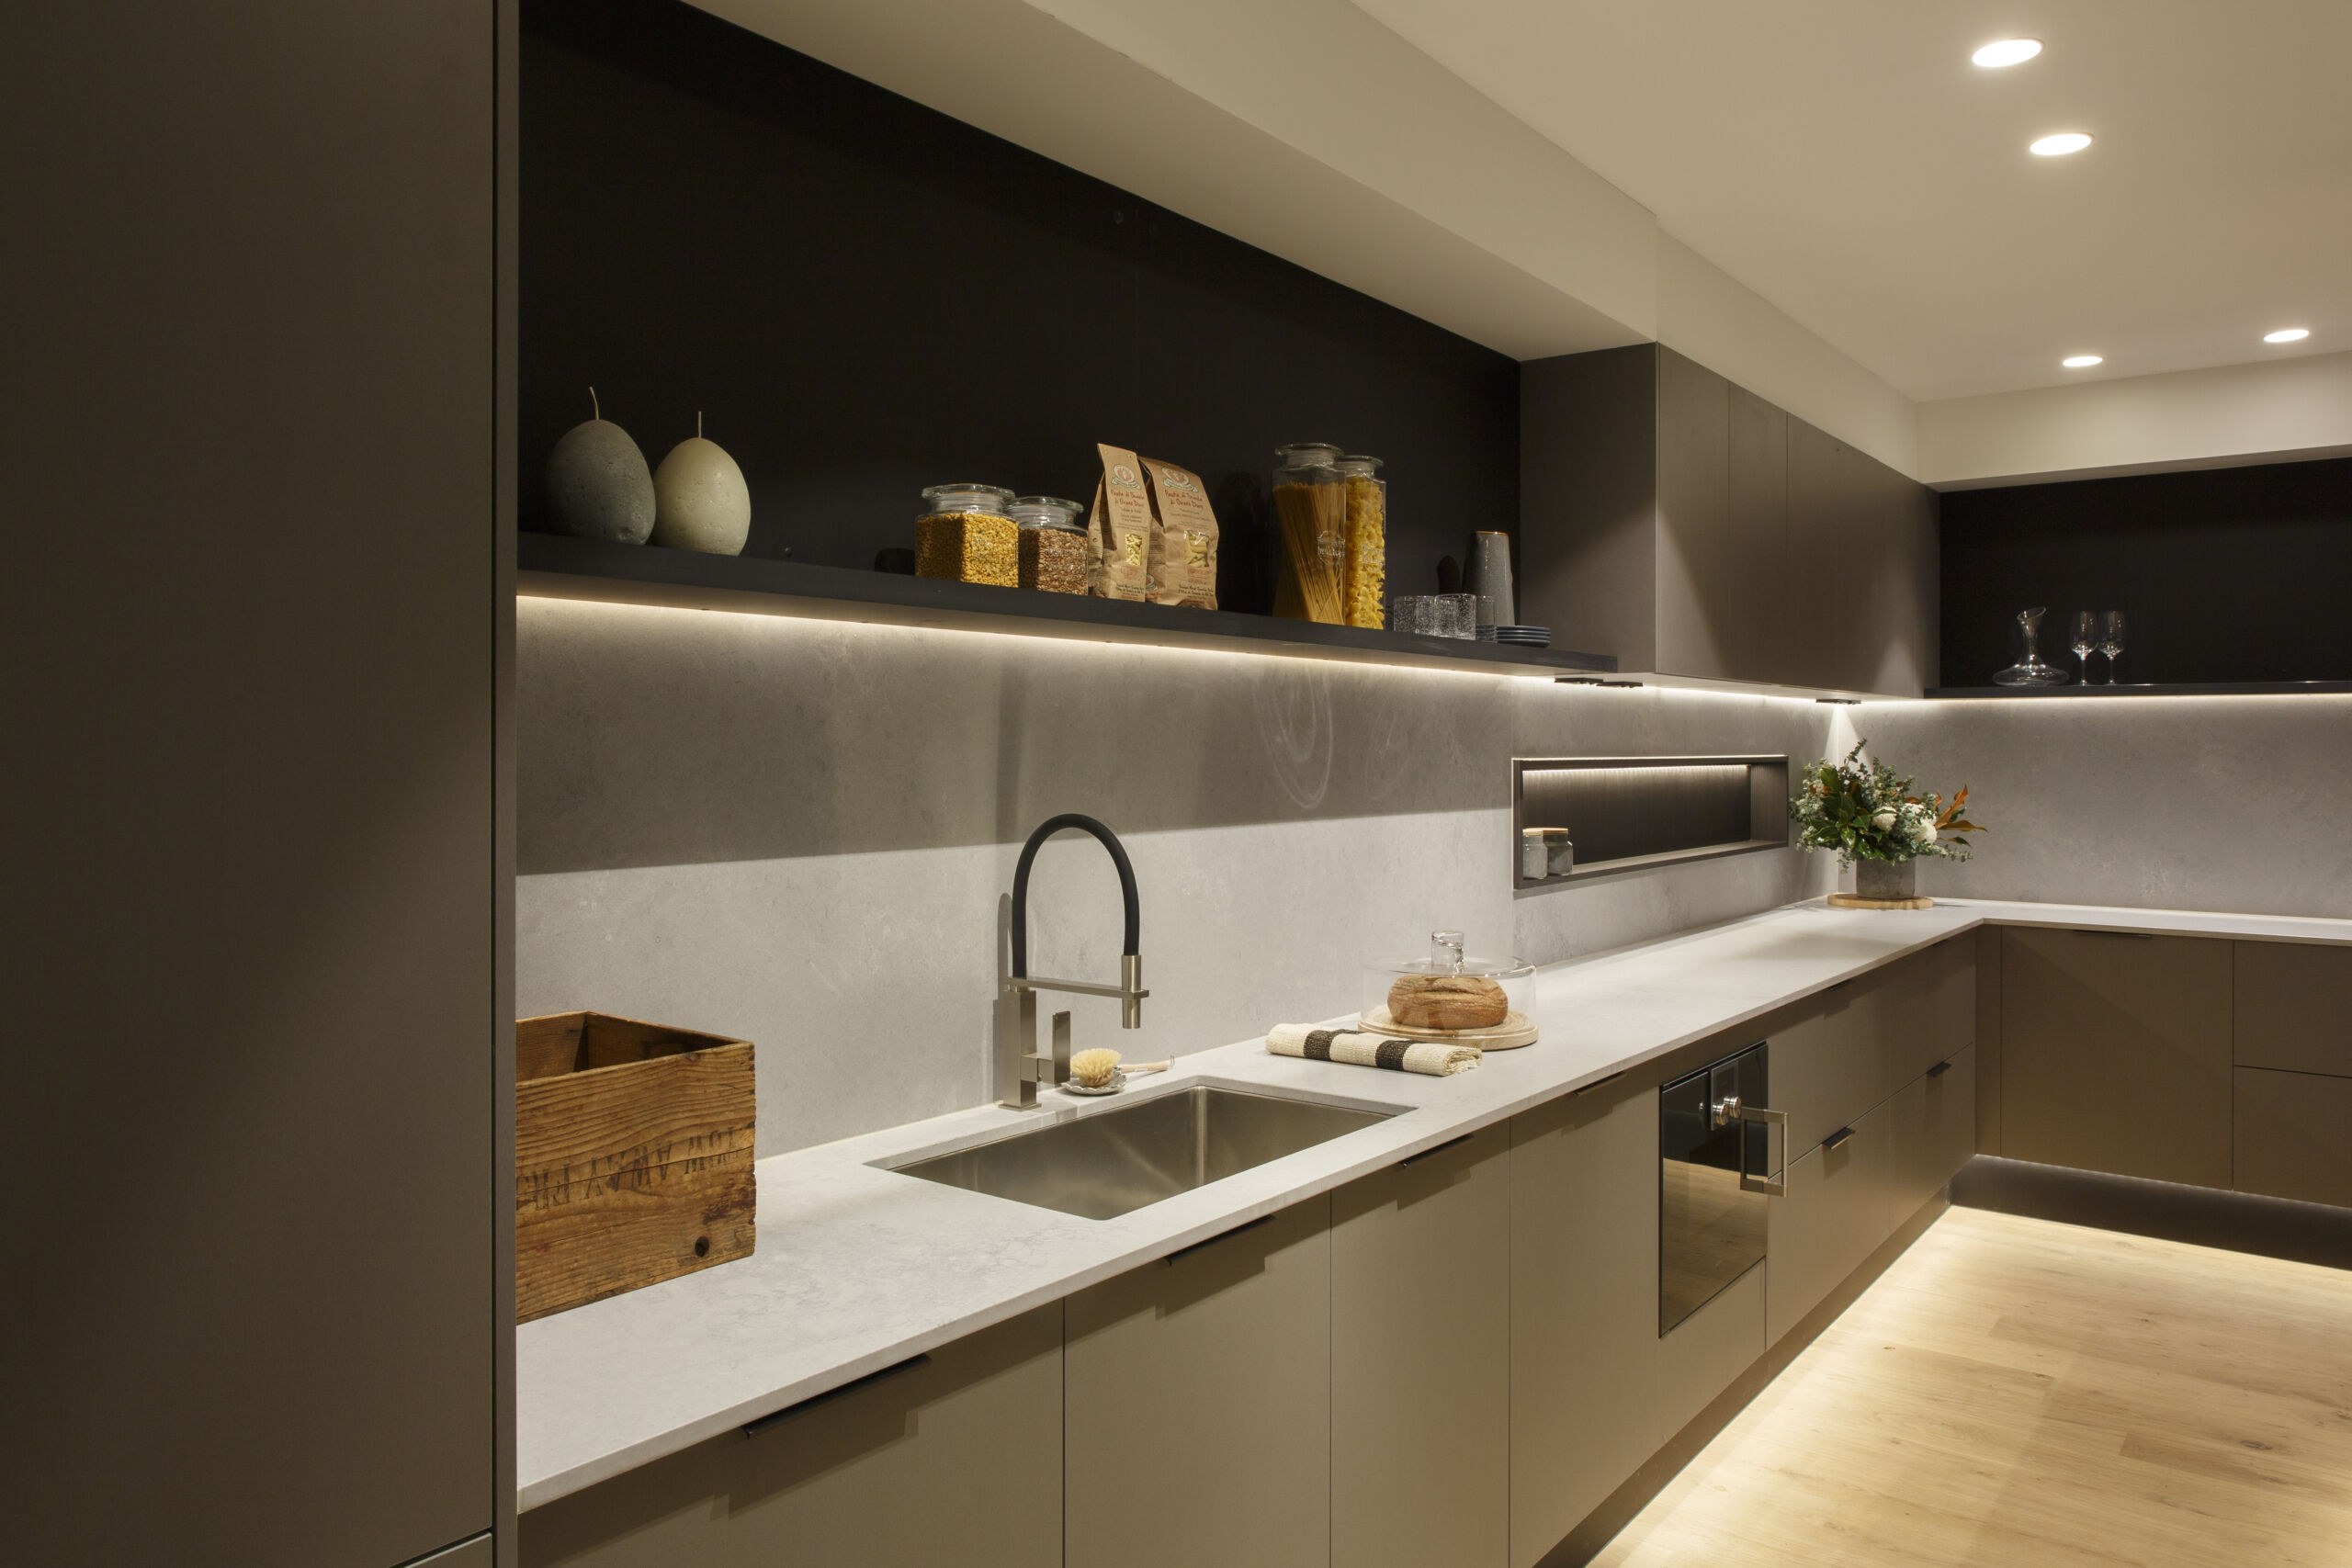 A dark butler's pantry with white benchtop and all the basic appliances